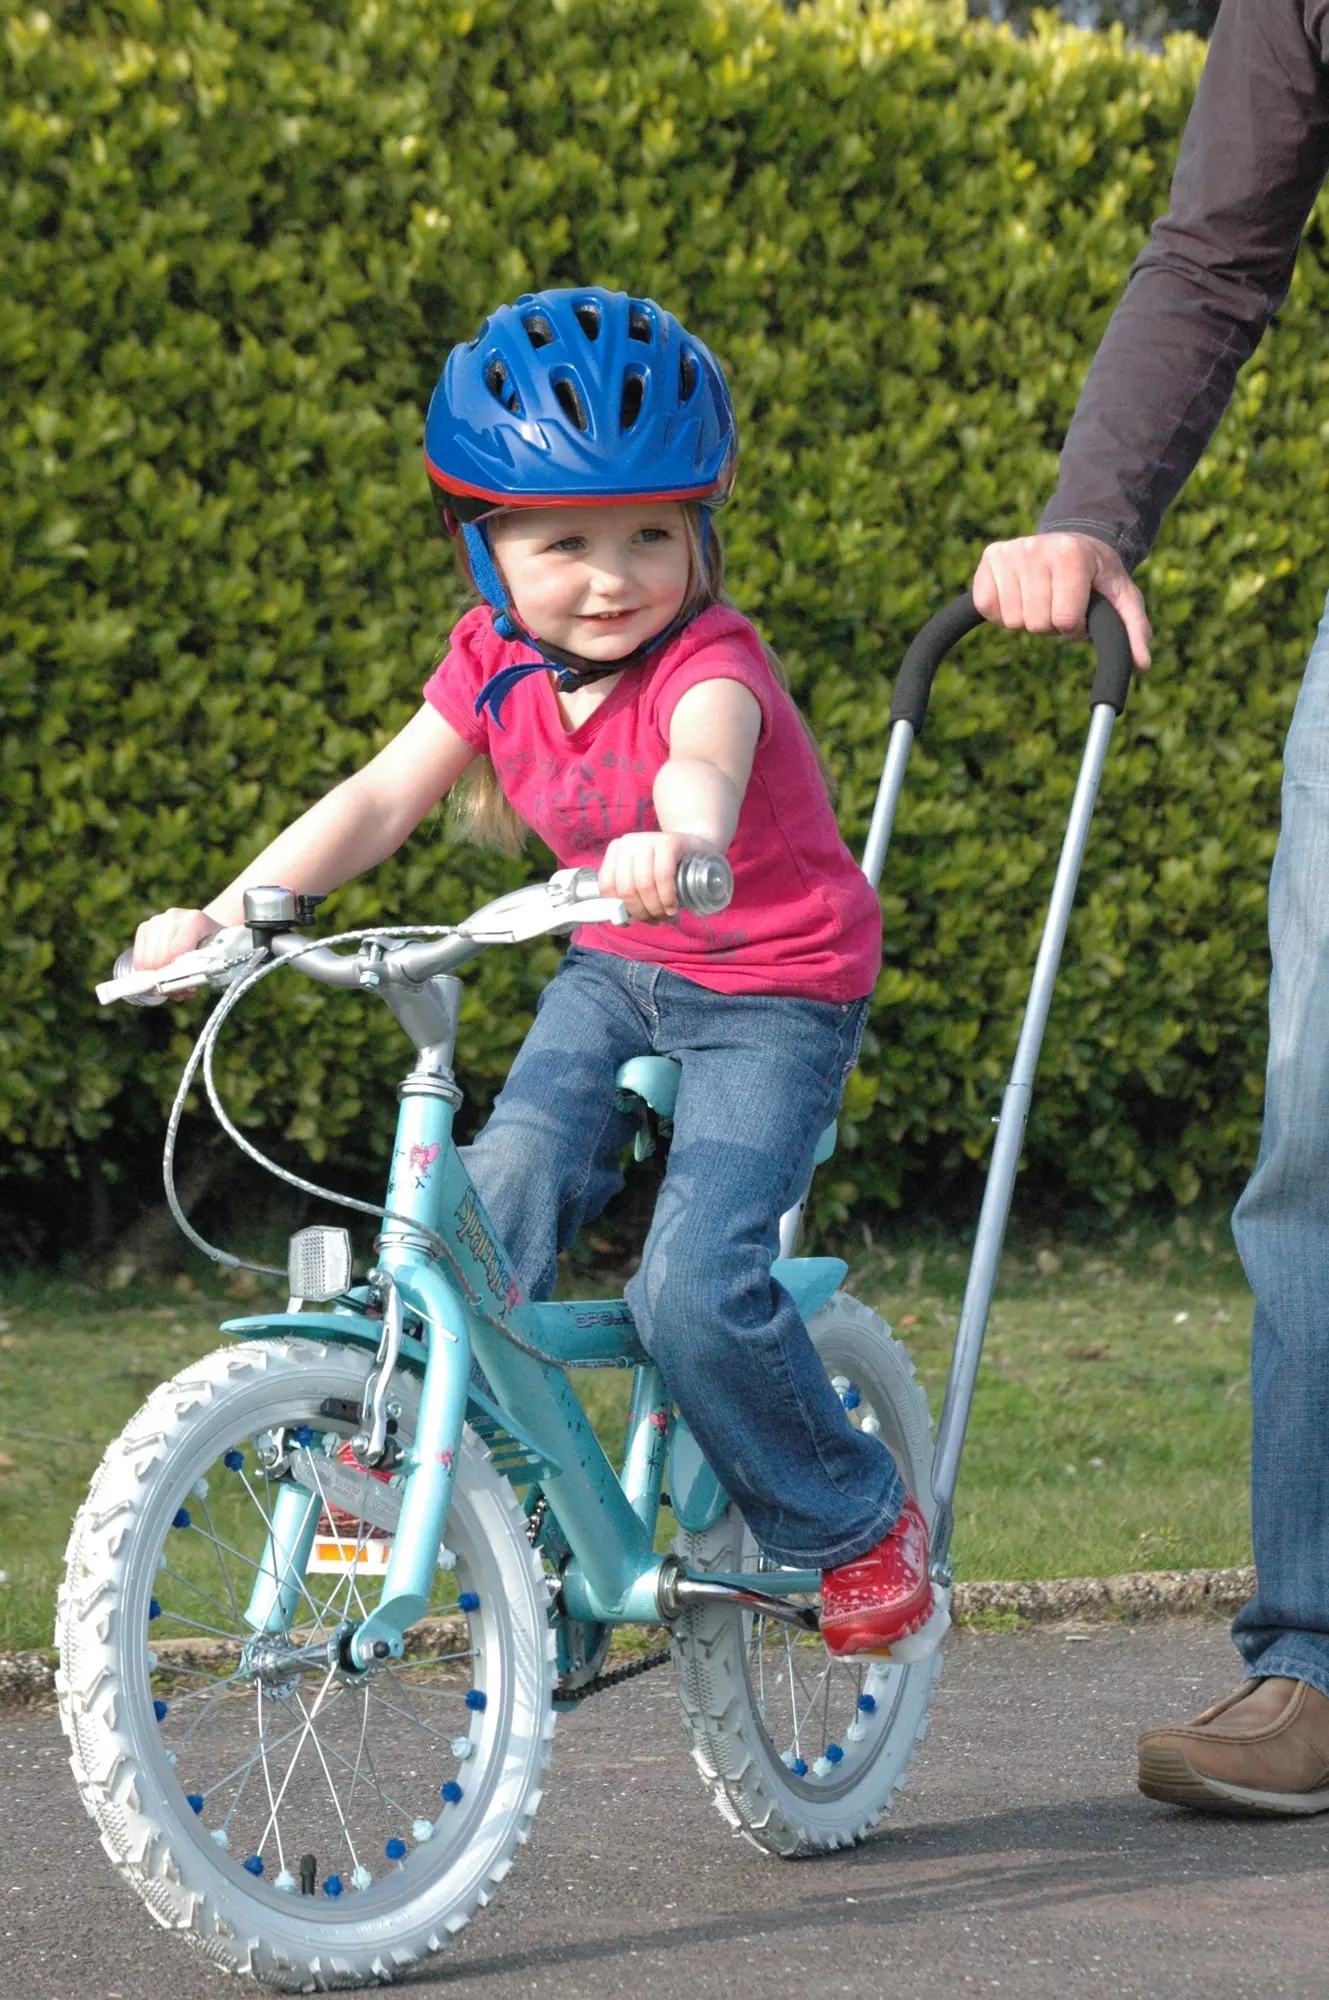 bike stabilisers for bikes with gears